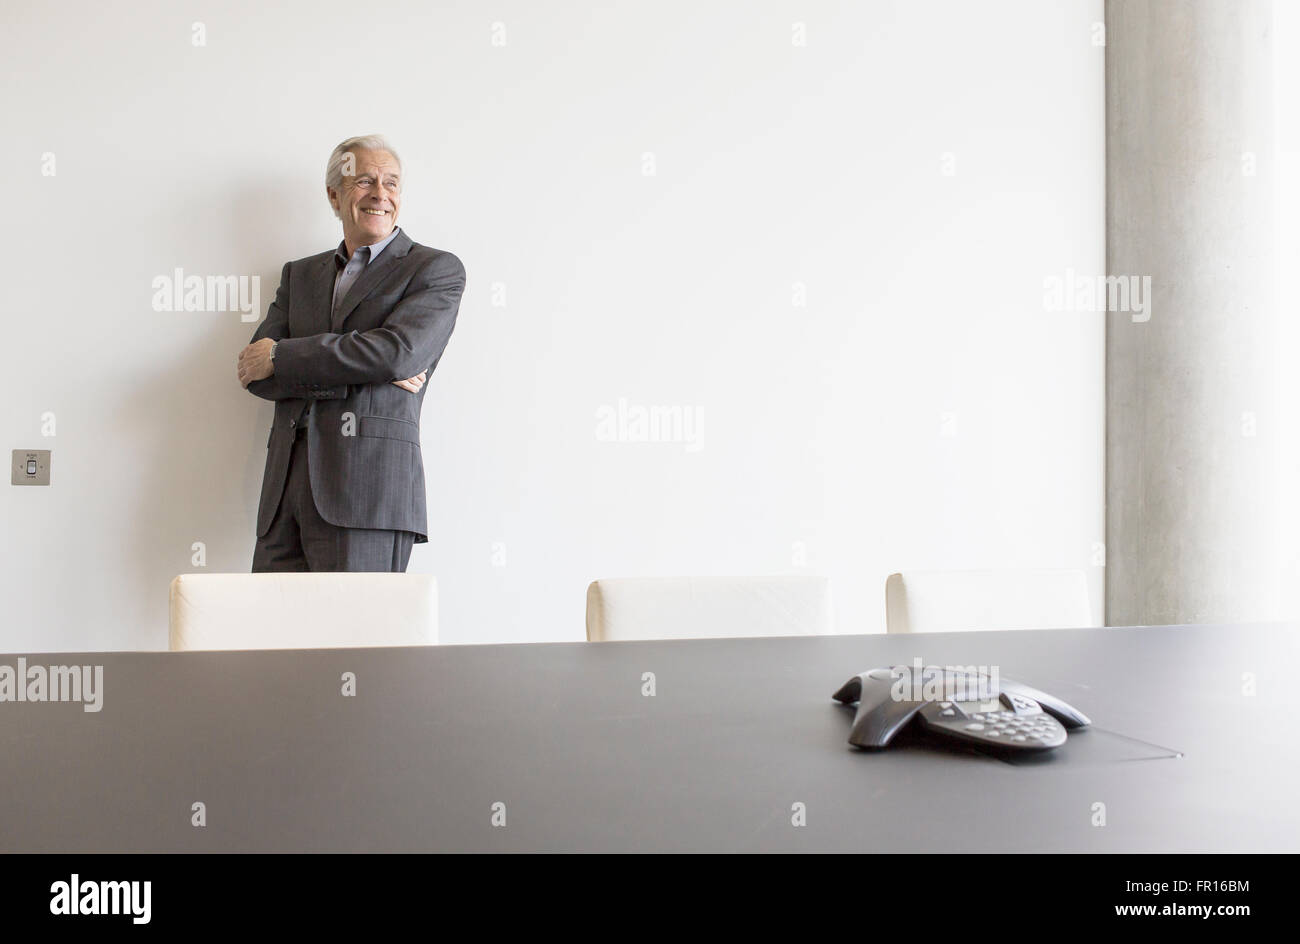 Smiling senior man looking away in conference room Stock Photo